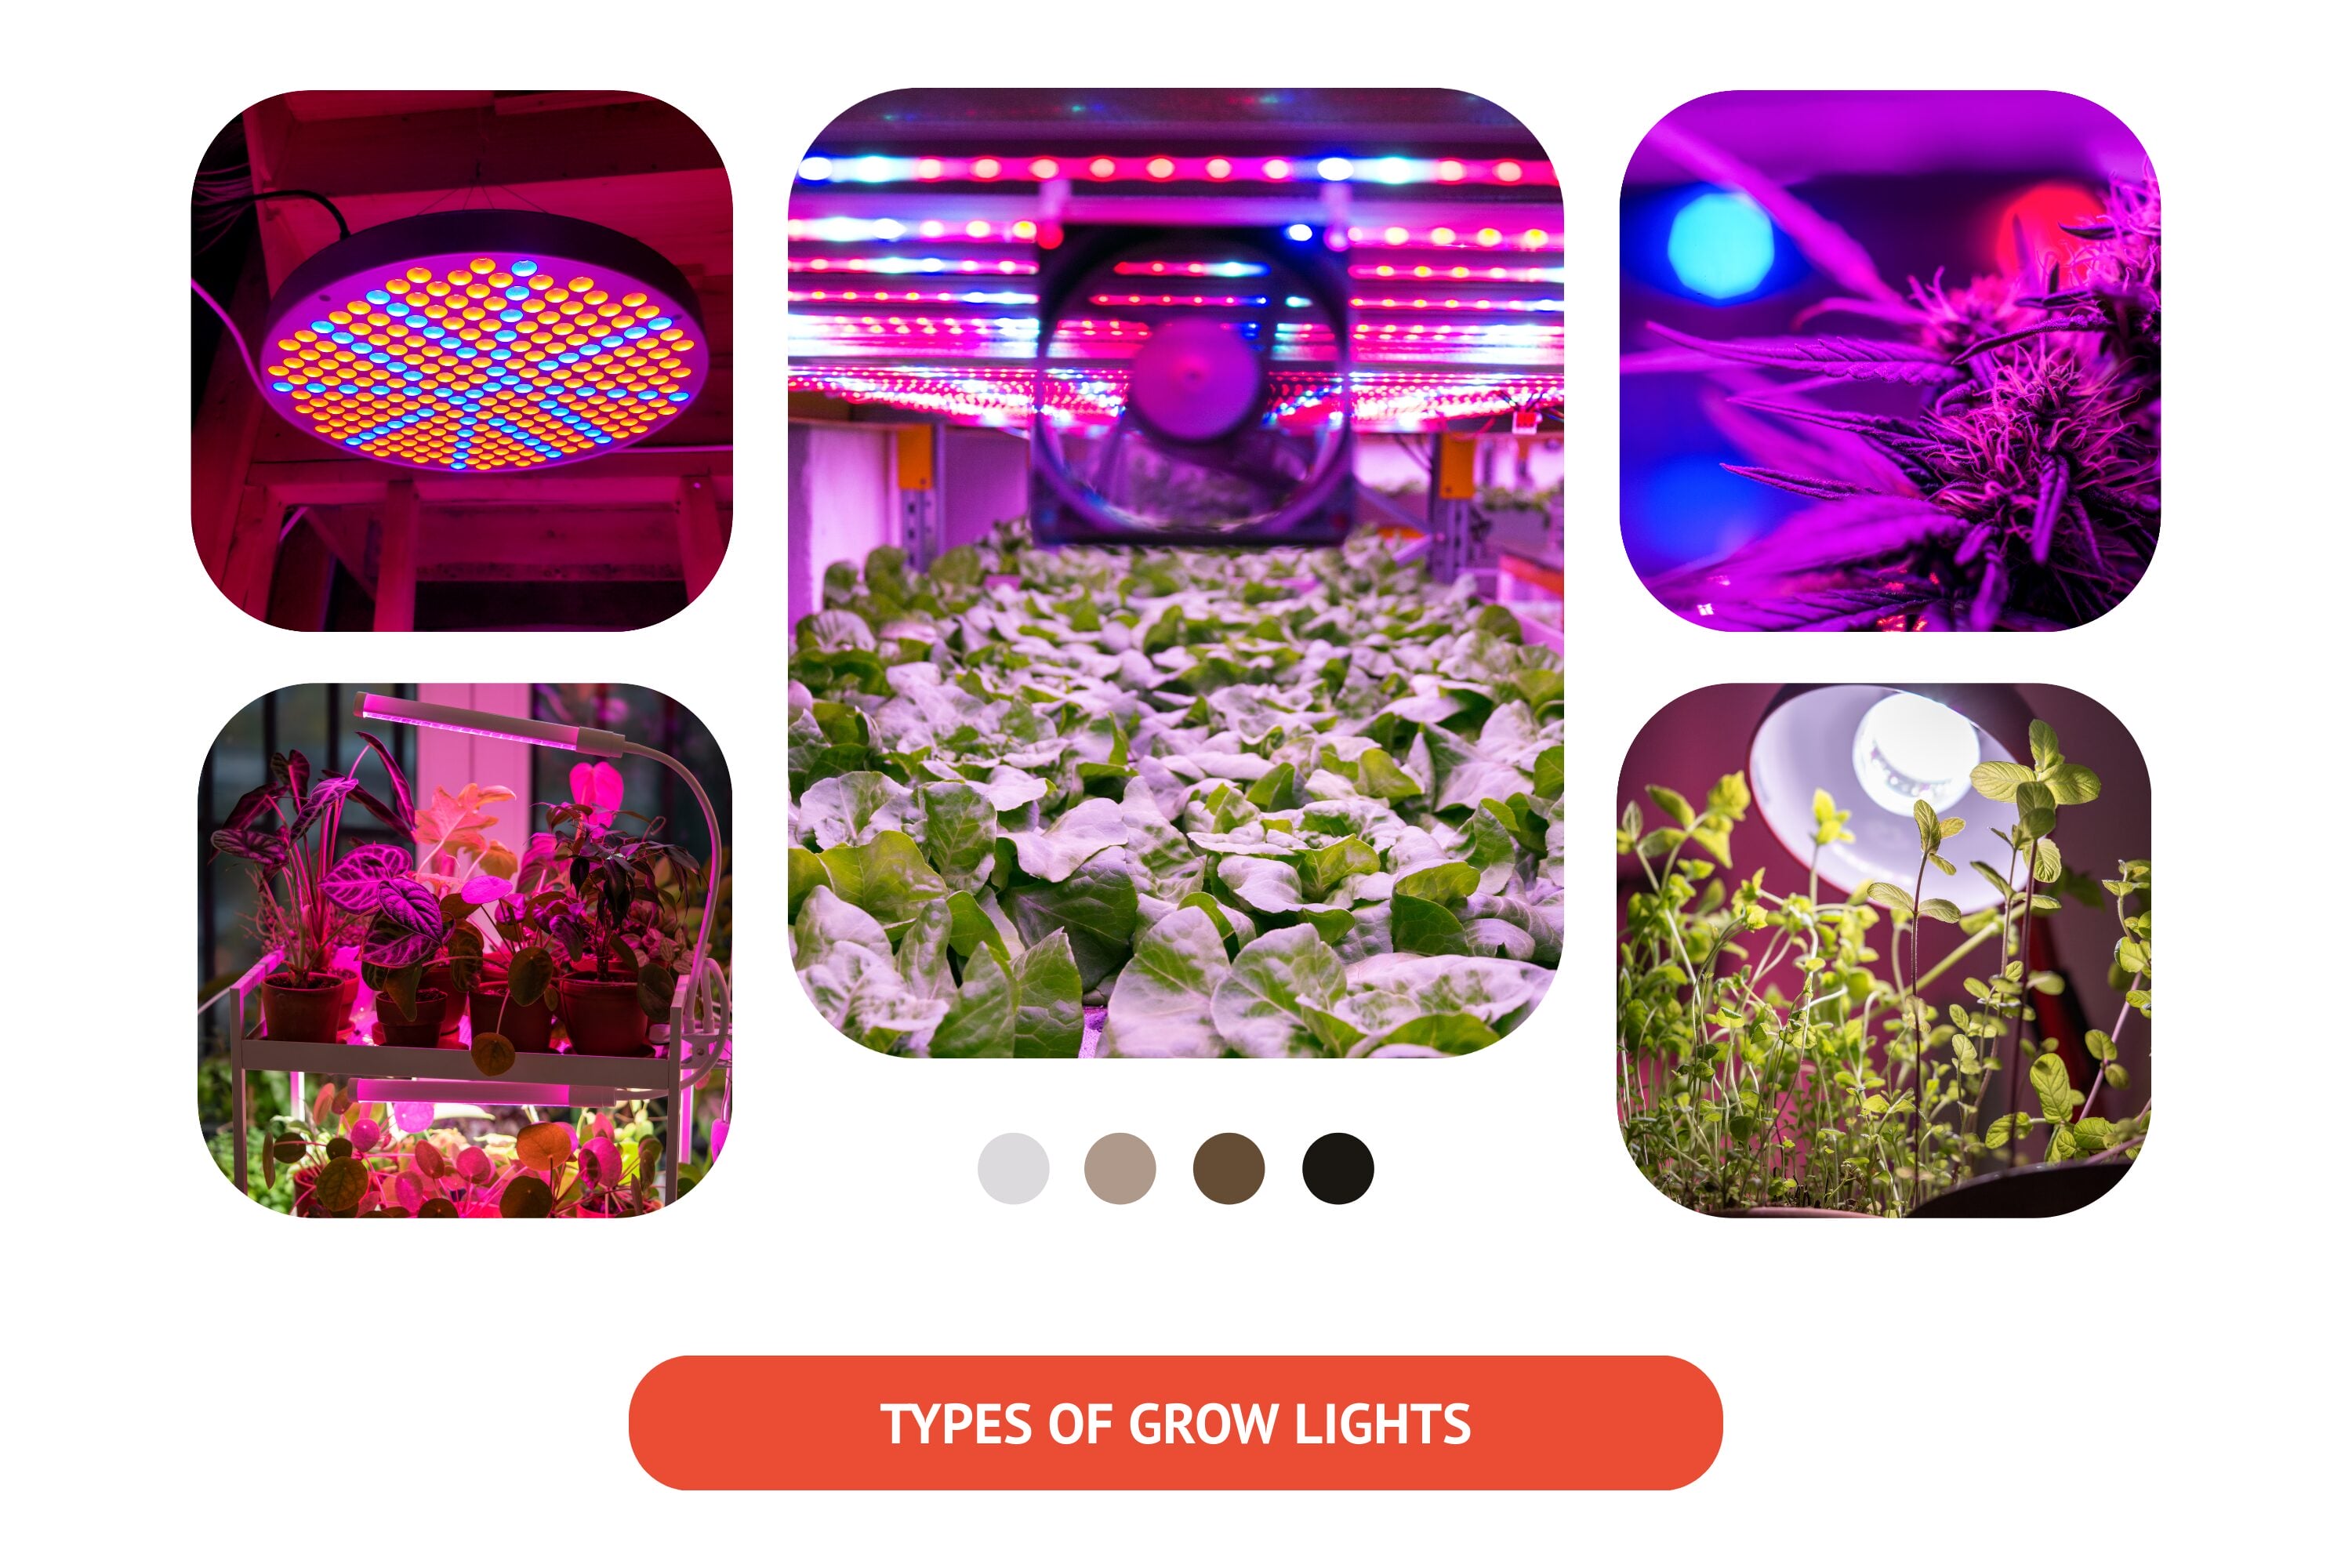 There are different types of grow lights available for use in gardening.